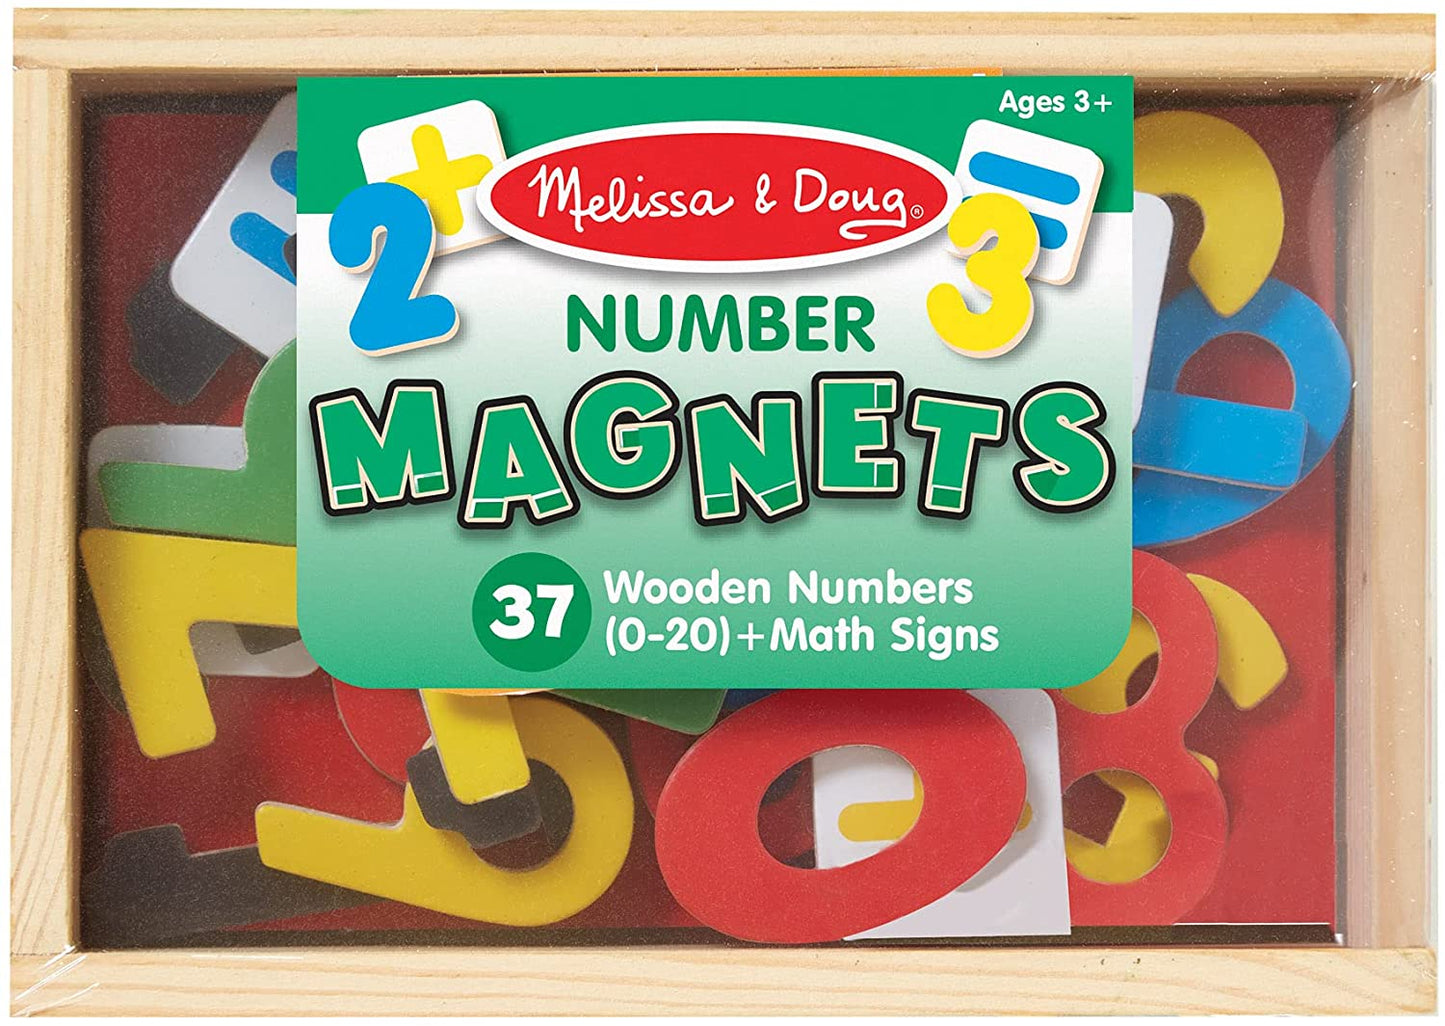 Melissa & Doug 37 Wooden Number Magnets in a Box